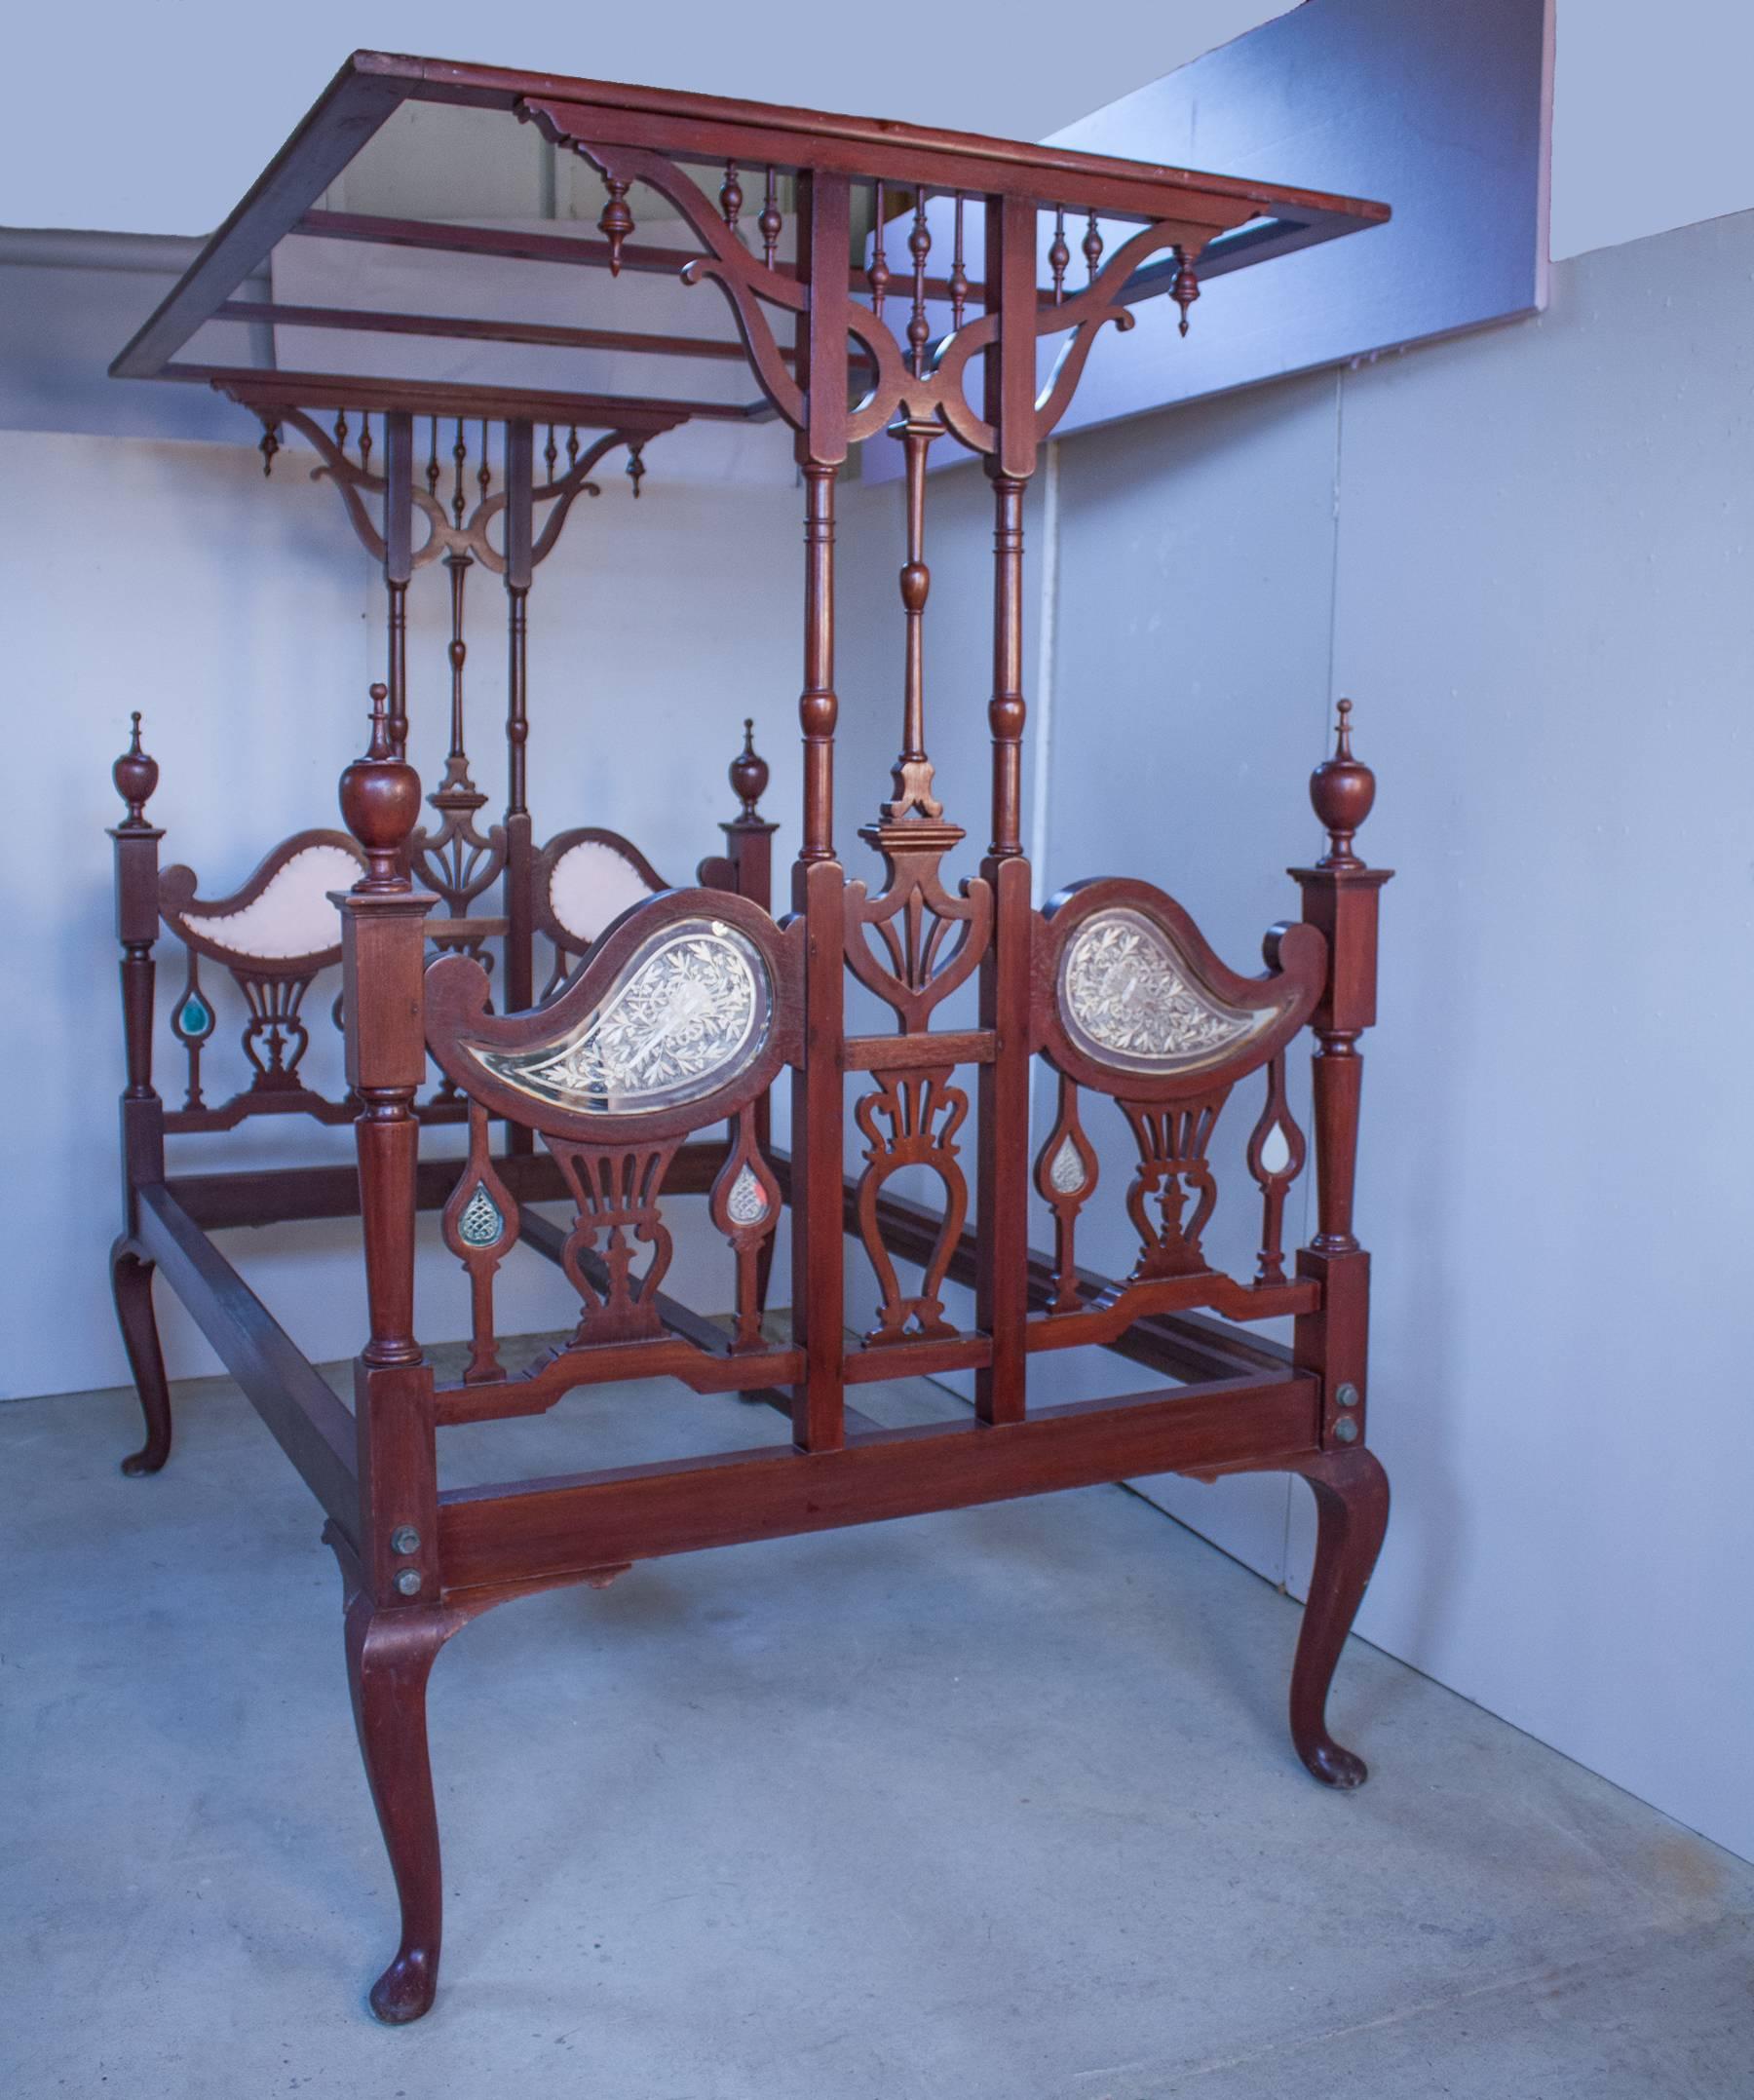 A richly toned mahogany bed with tester canopy from northern India, circa 1930. The intricately carved frame has mirrors reverse etched with musical instruments on the outside of the head- and footboards and upholstery on the inside. The frame comes